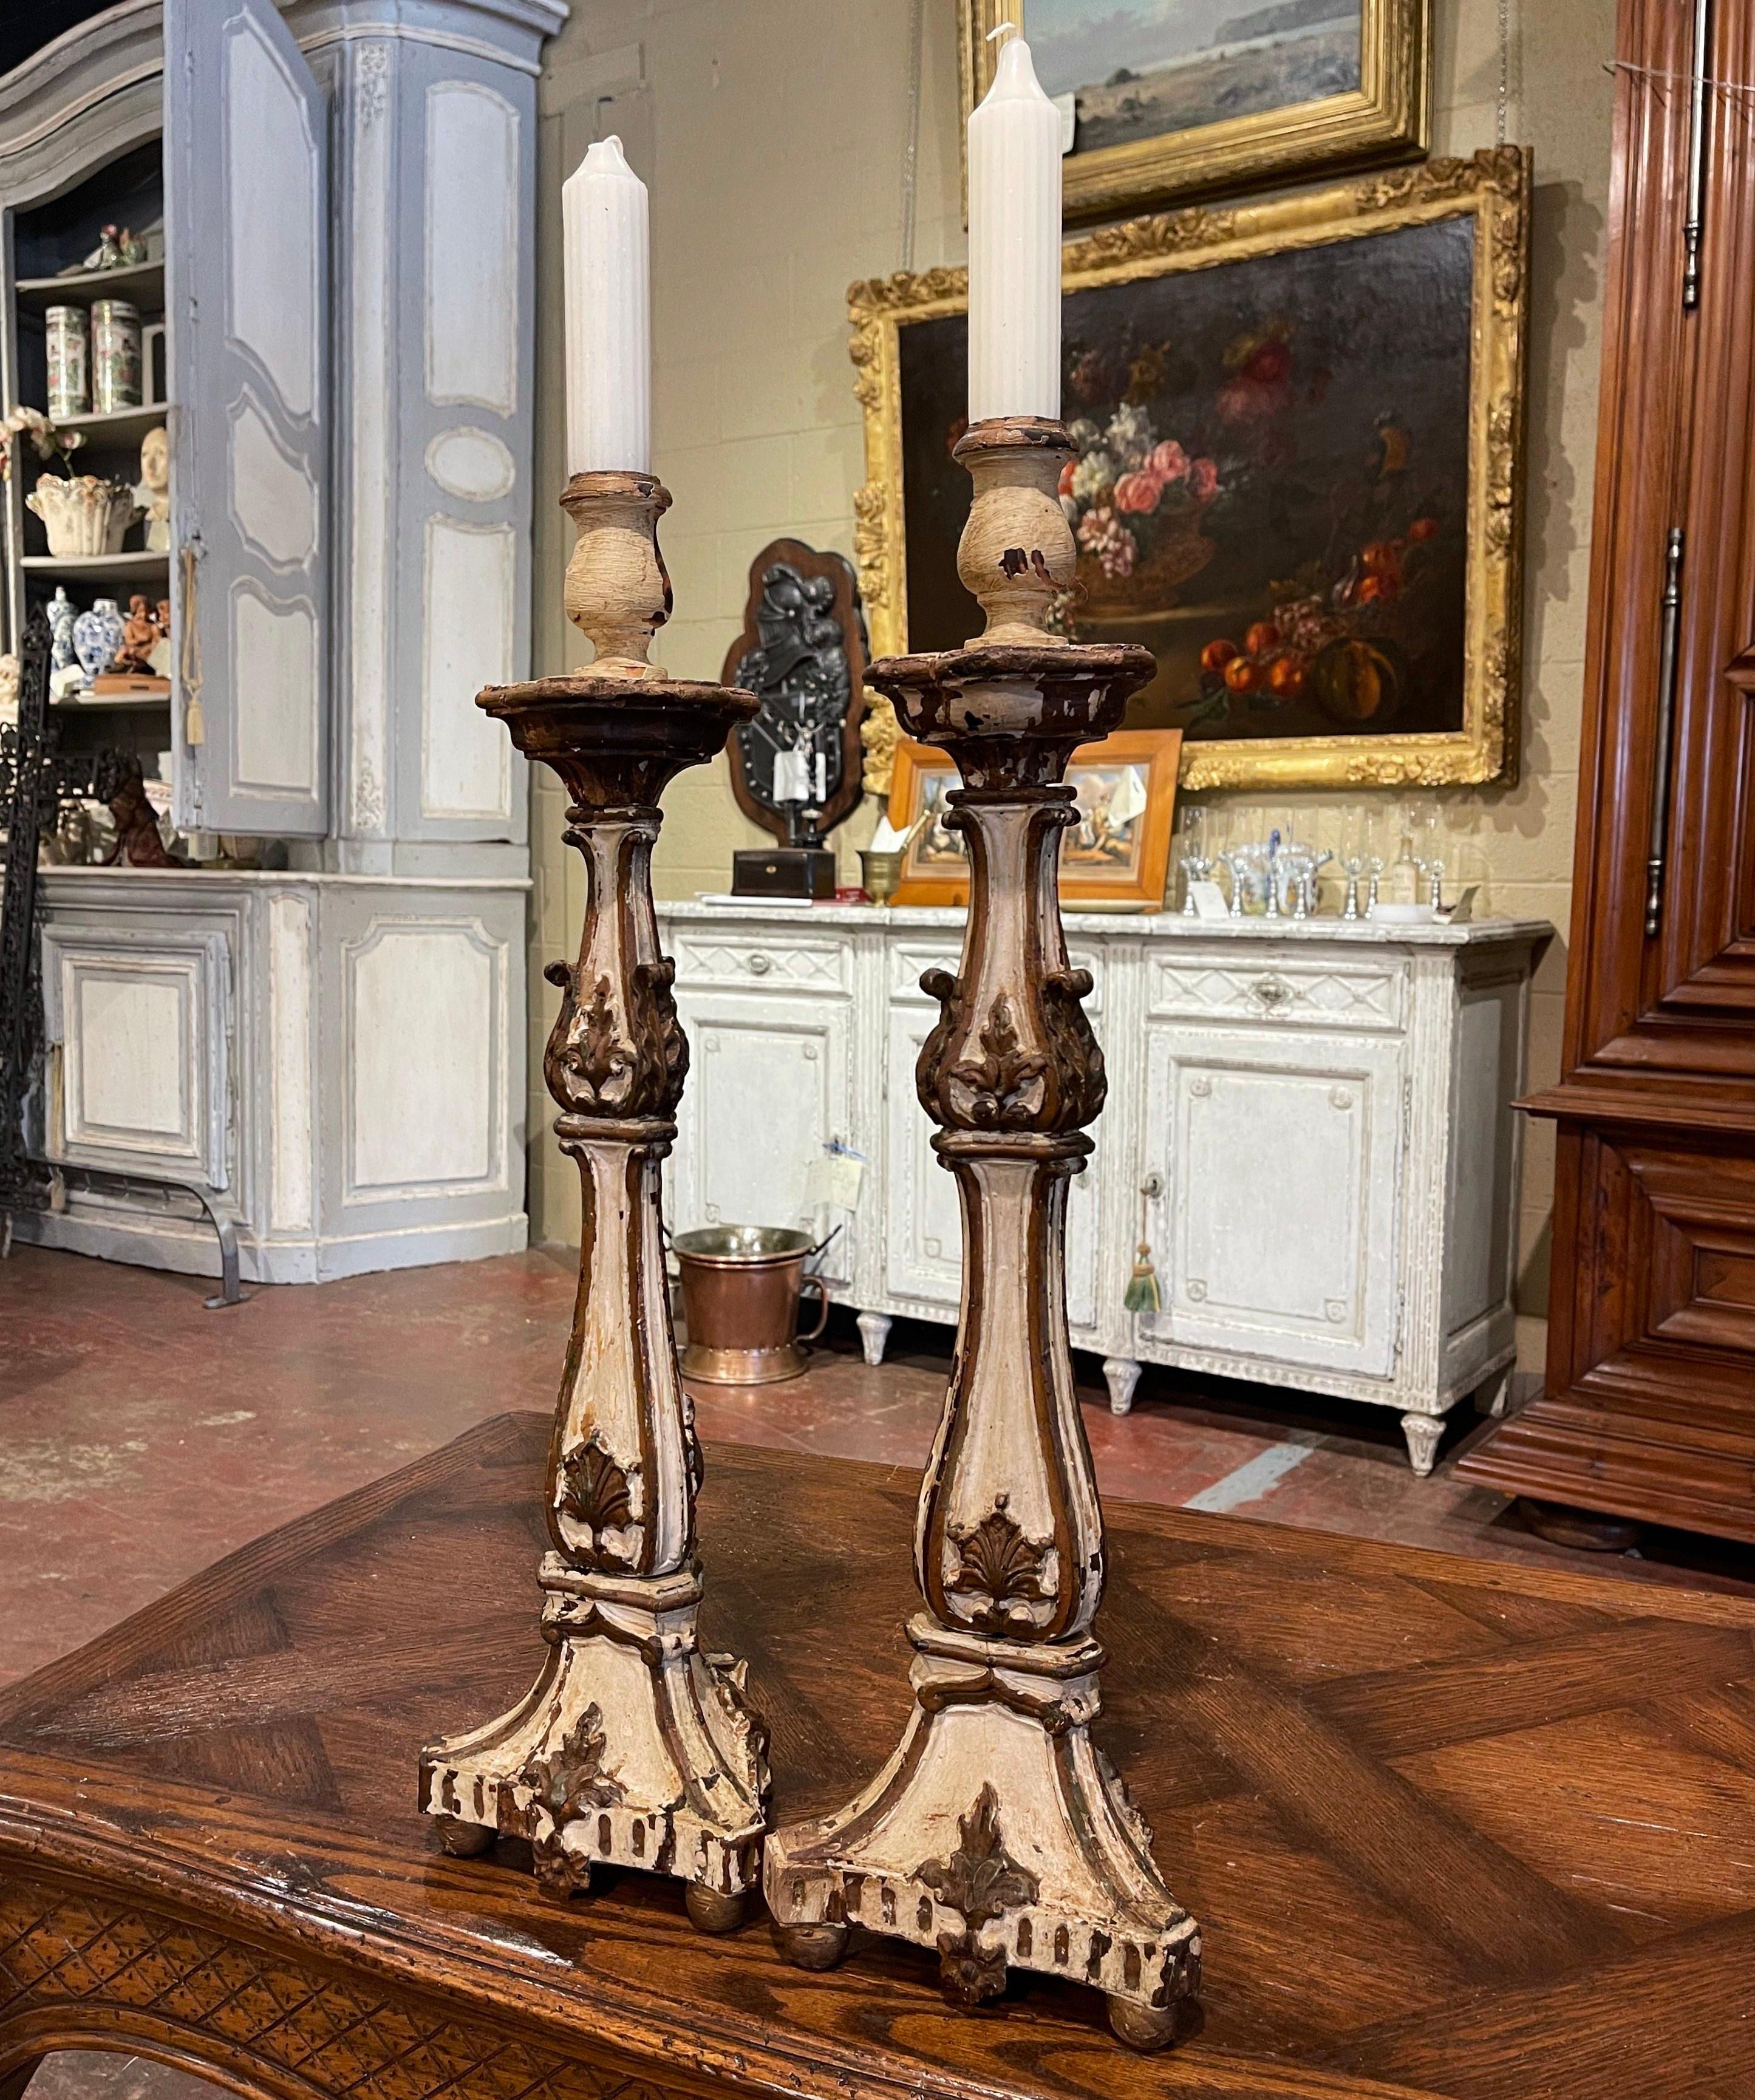 Add an air of elegance to your home with this pair of antique candlesticks. Crafted in Italy circa 1880, each candle holder stands on round feet over a sturdy triangle base decorated with hand carved floral motifs. The carved stem is embellished